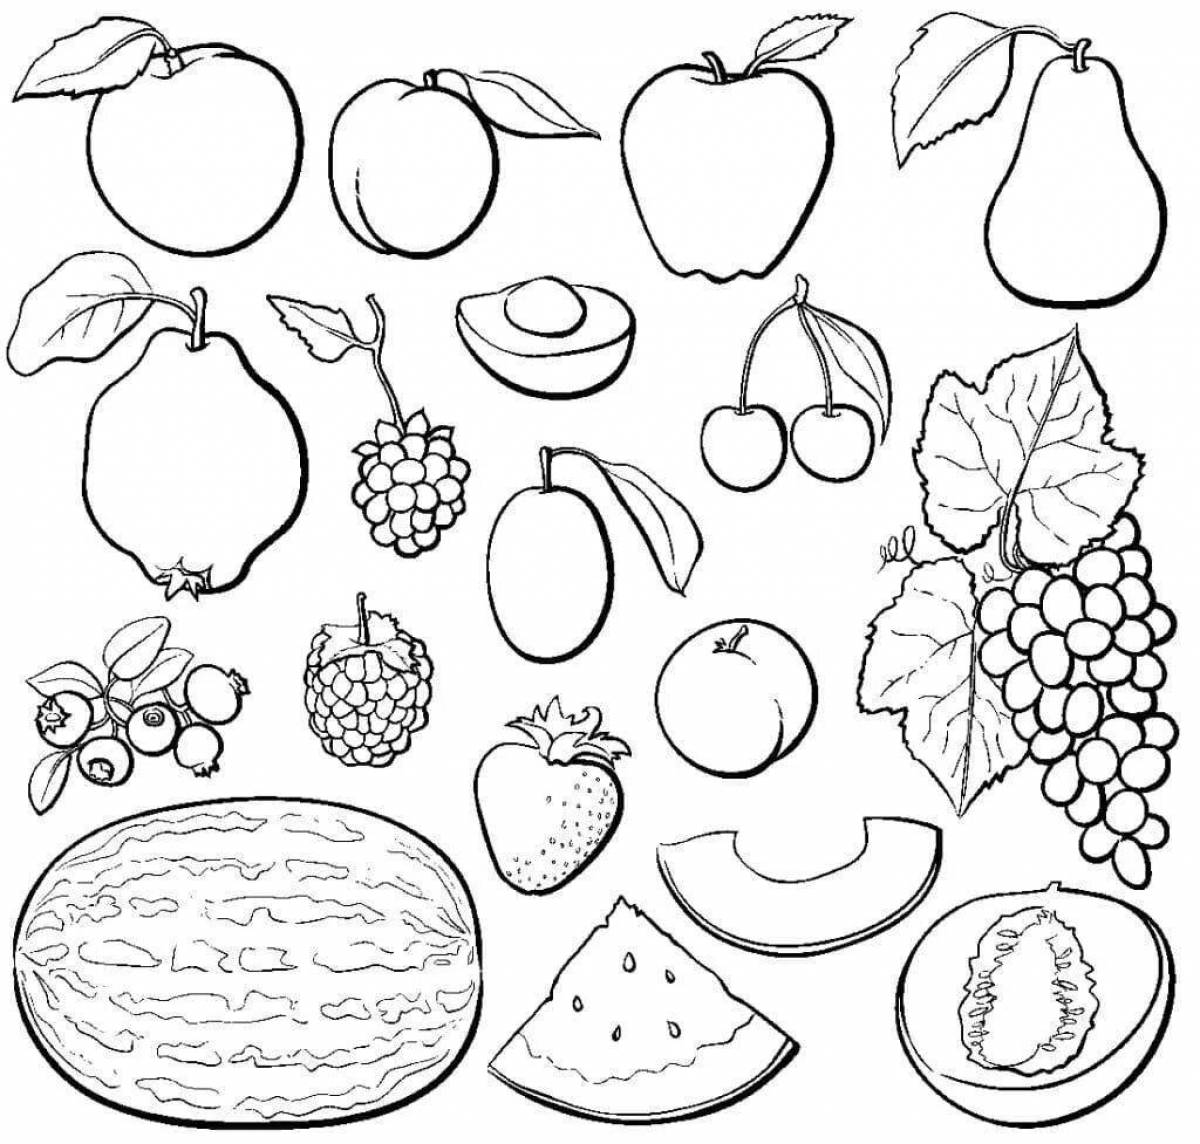 Funny berries and fruits coloring for kids